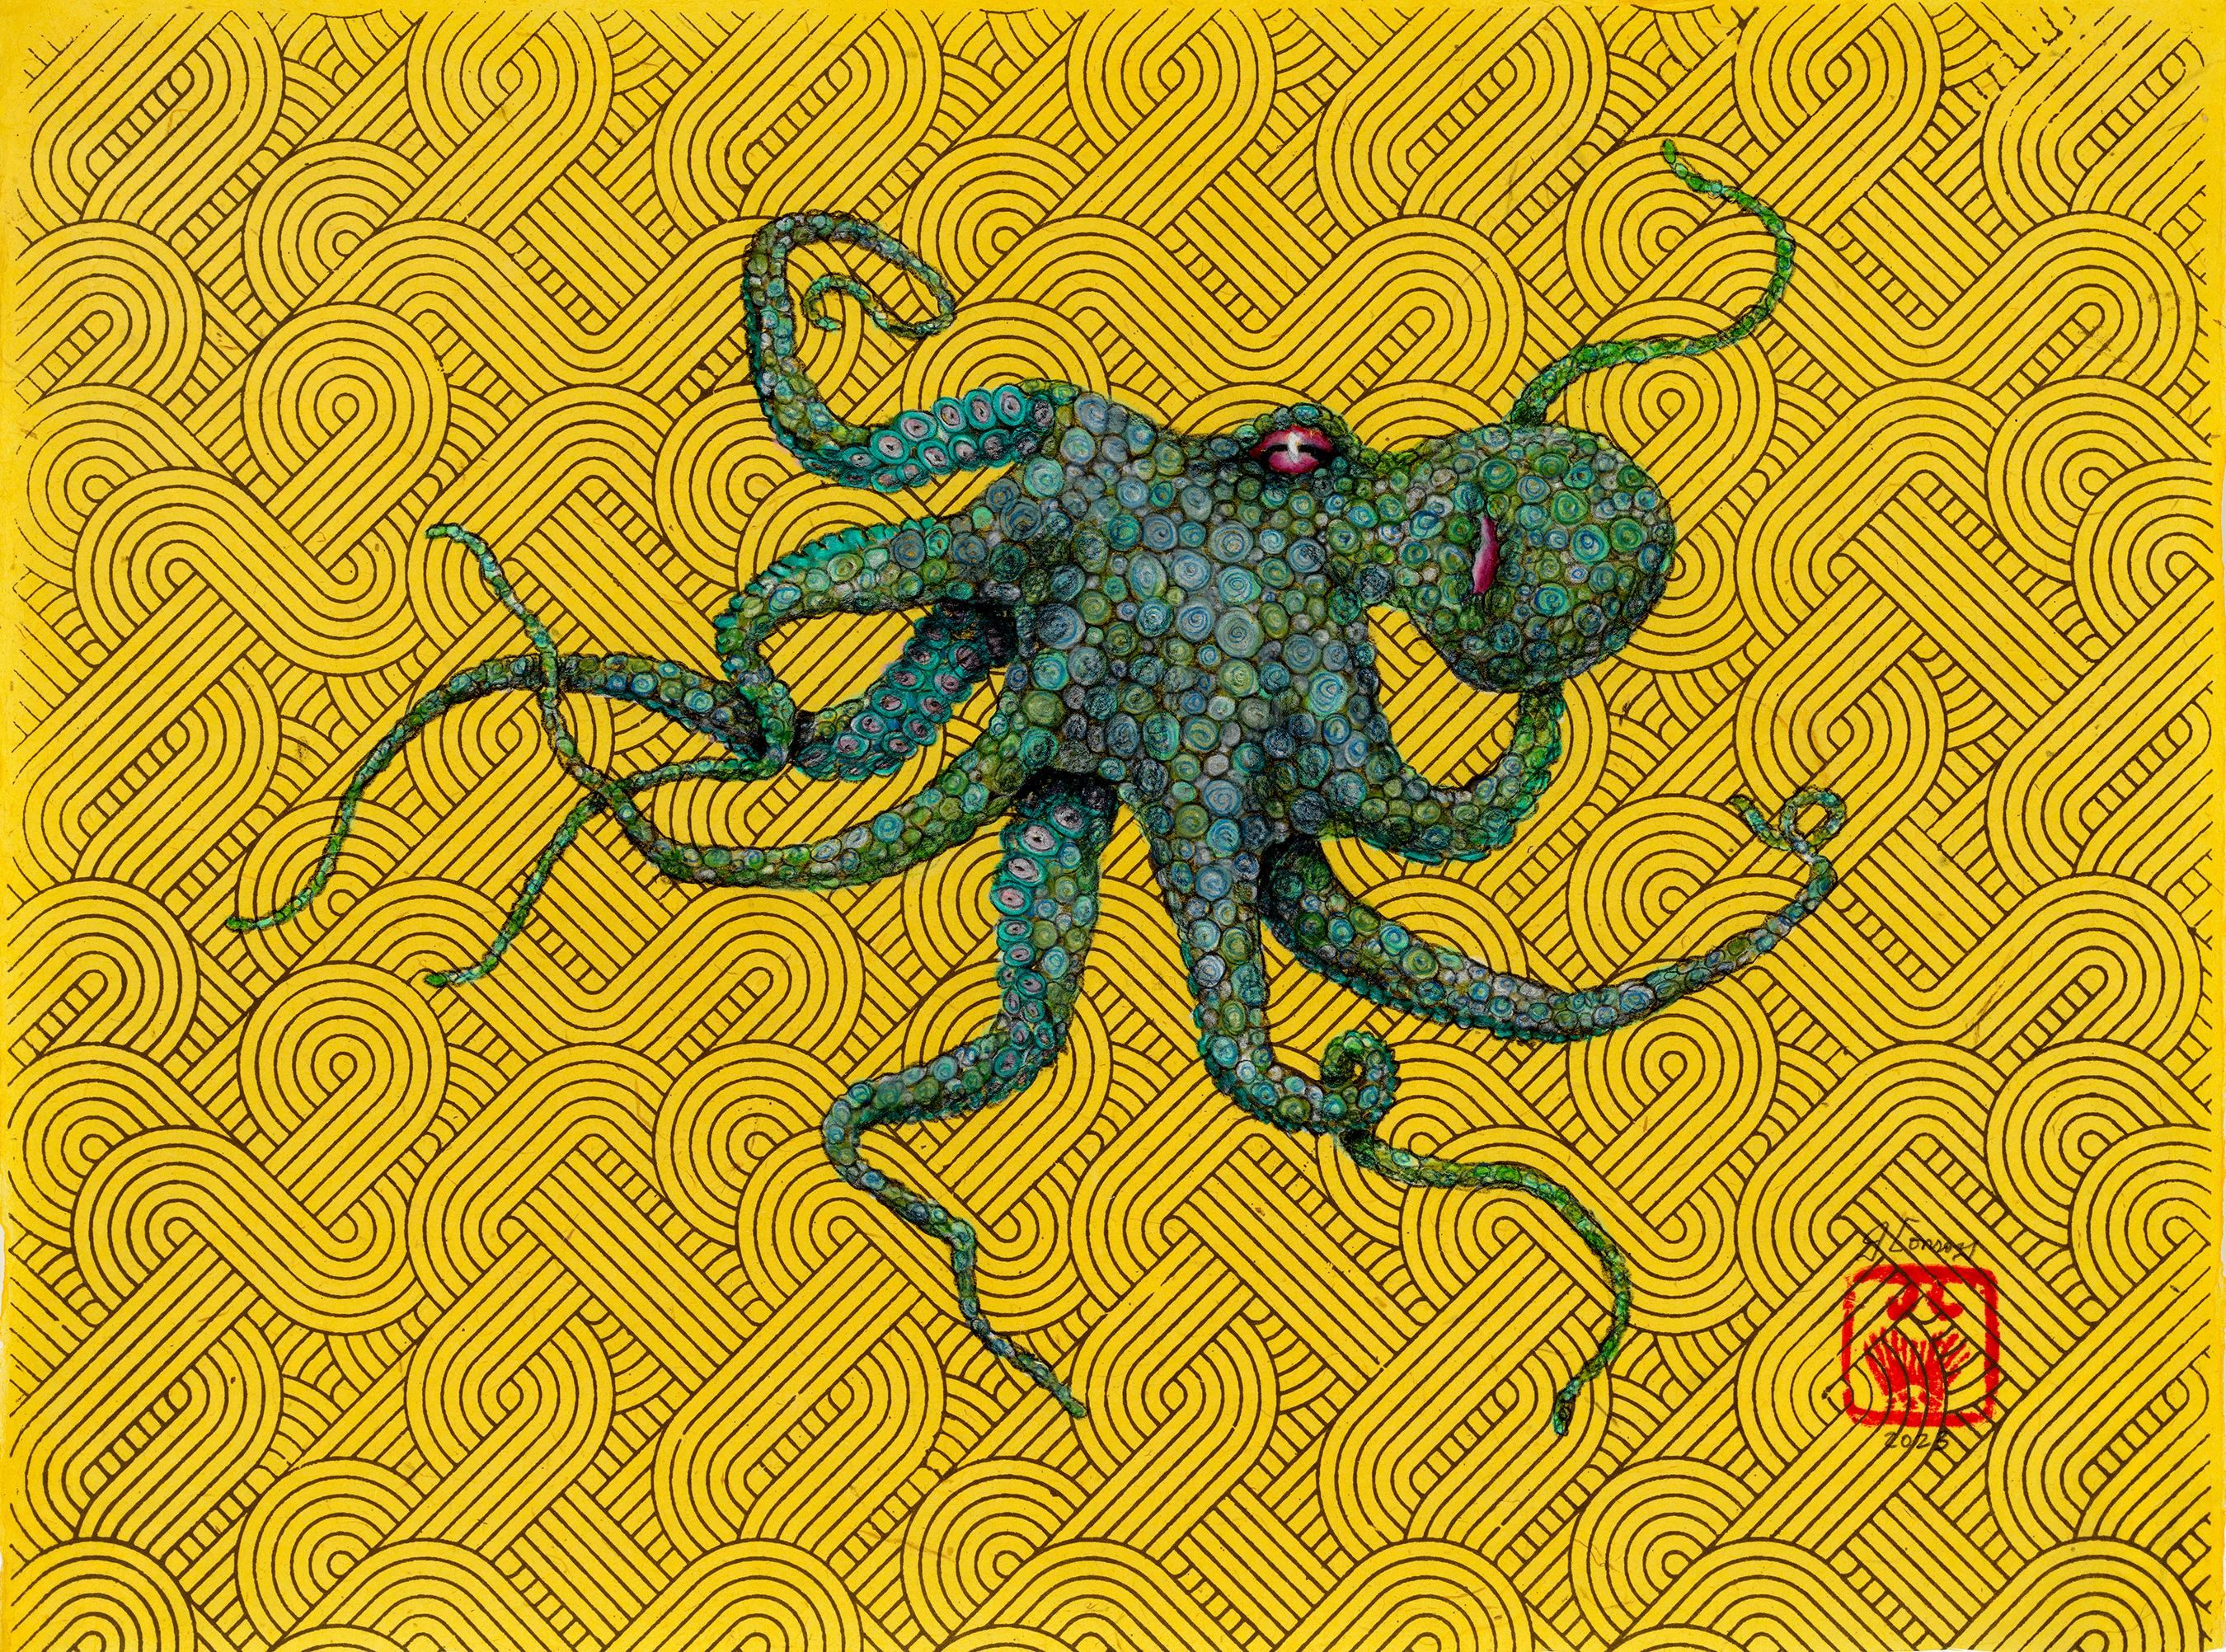 Boucle d'or - Goblin vert - Gyotaku Style Sumi Ink Painting of an Octopus (peinture à l'encre Sumi d'une pieuvre)